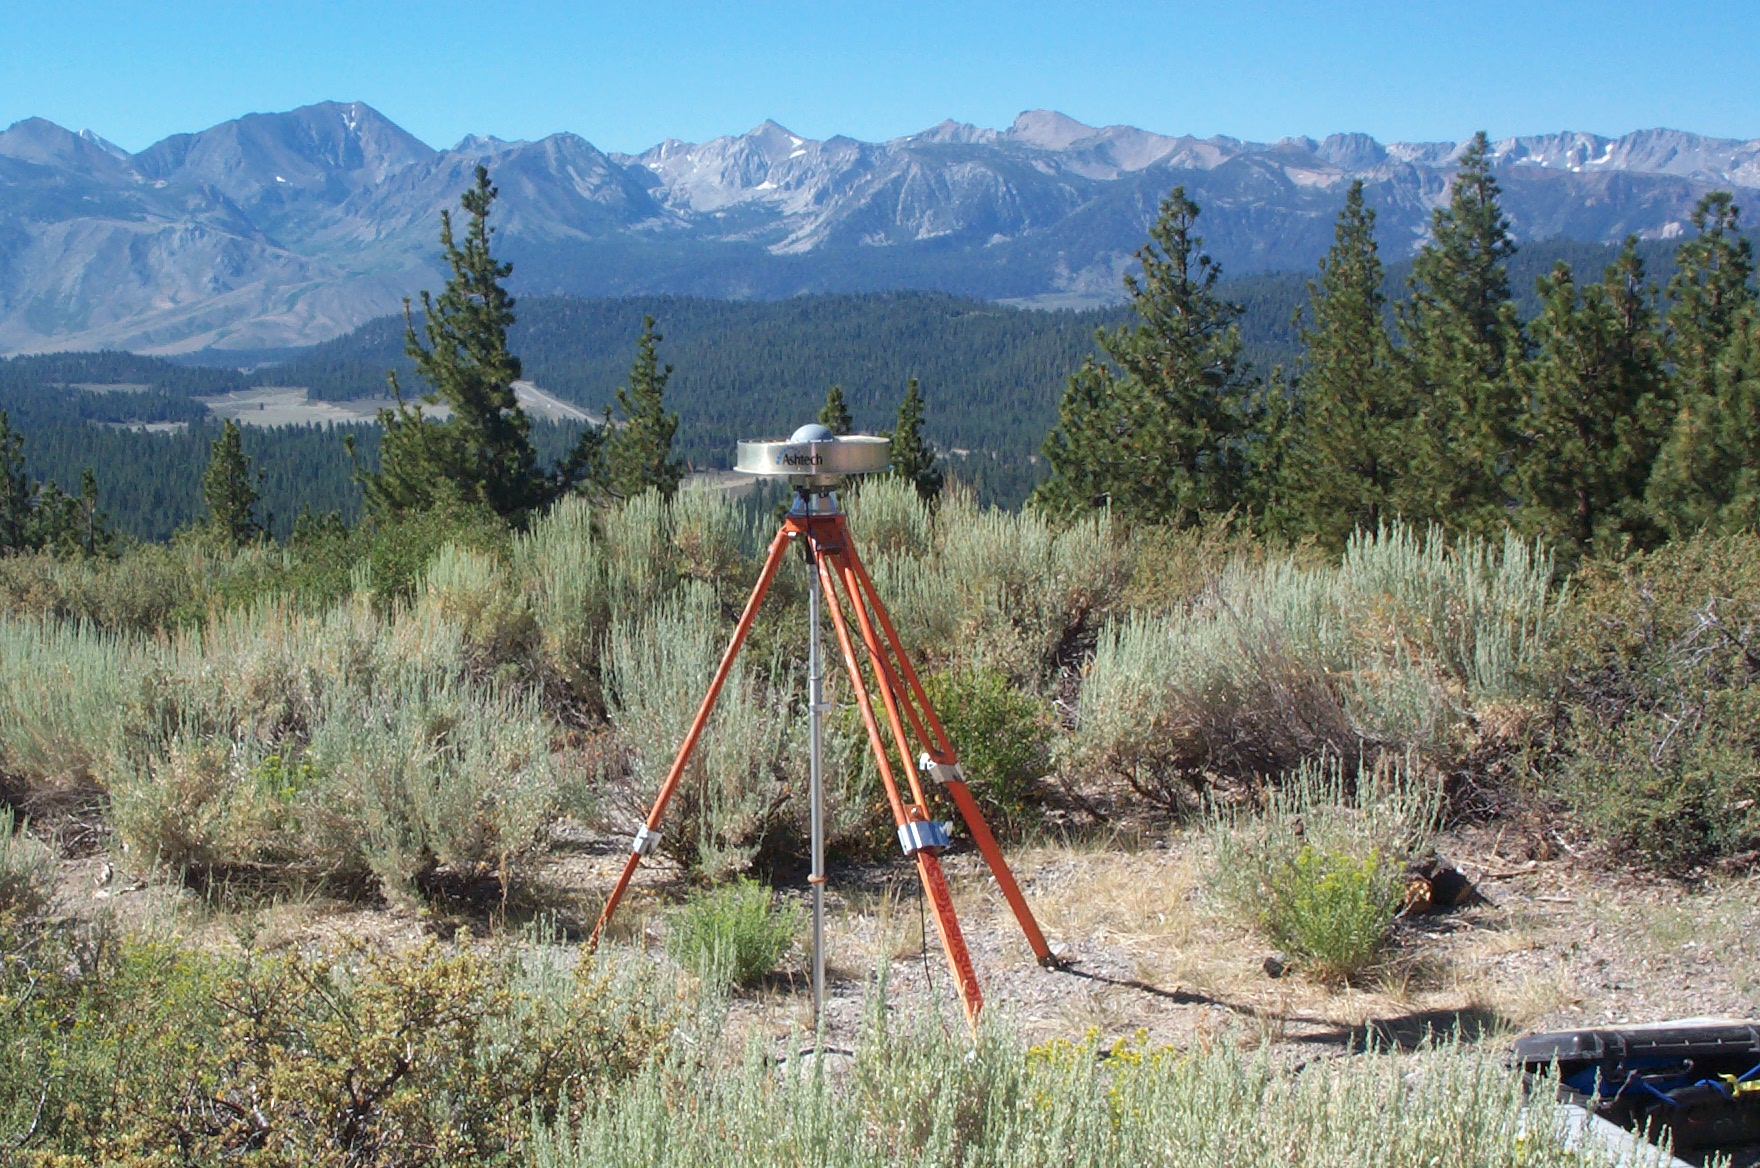 GPS station LKMT. Located on Lookout Mountain near Mammoth Lakes, California.